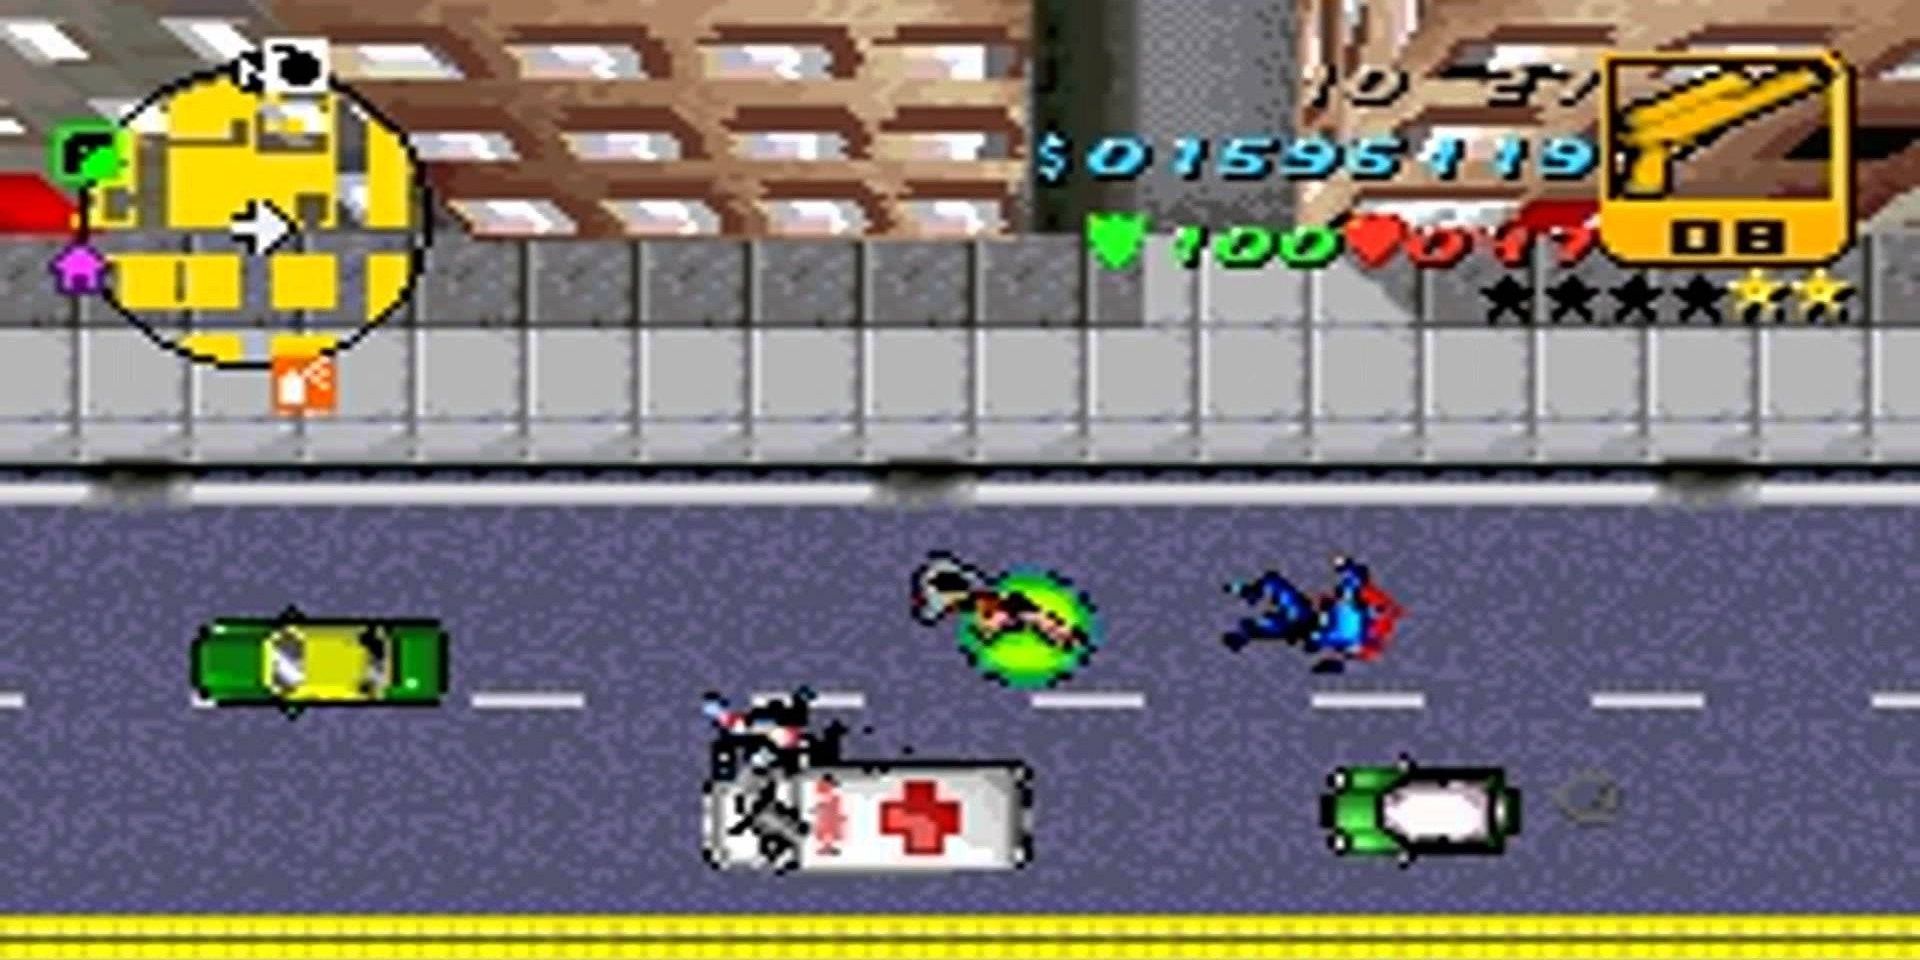 A screenshot showing gameplay in Grand Theft Auto Advance and getting a kill